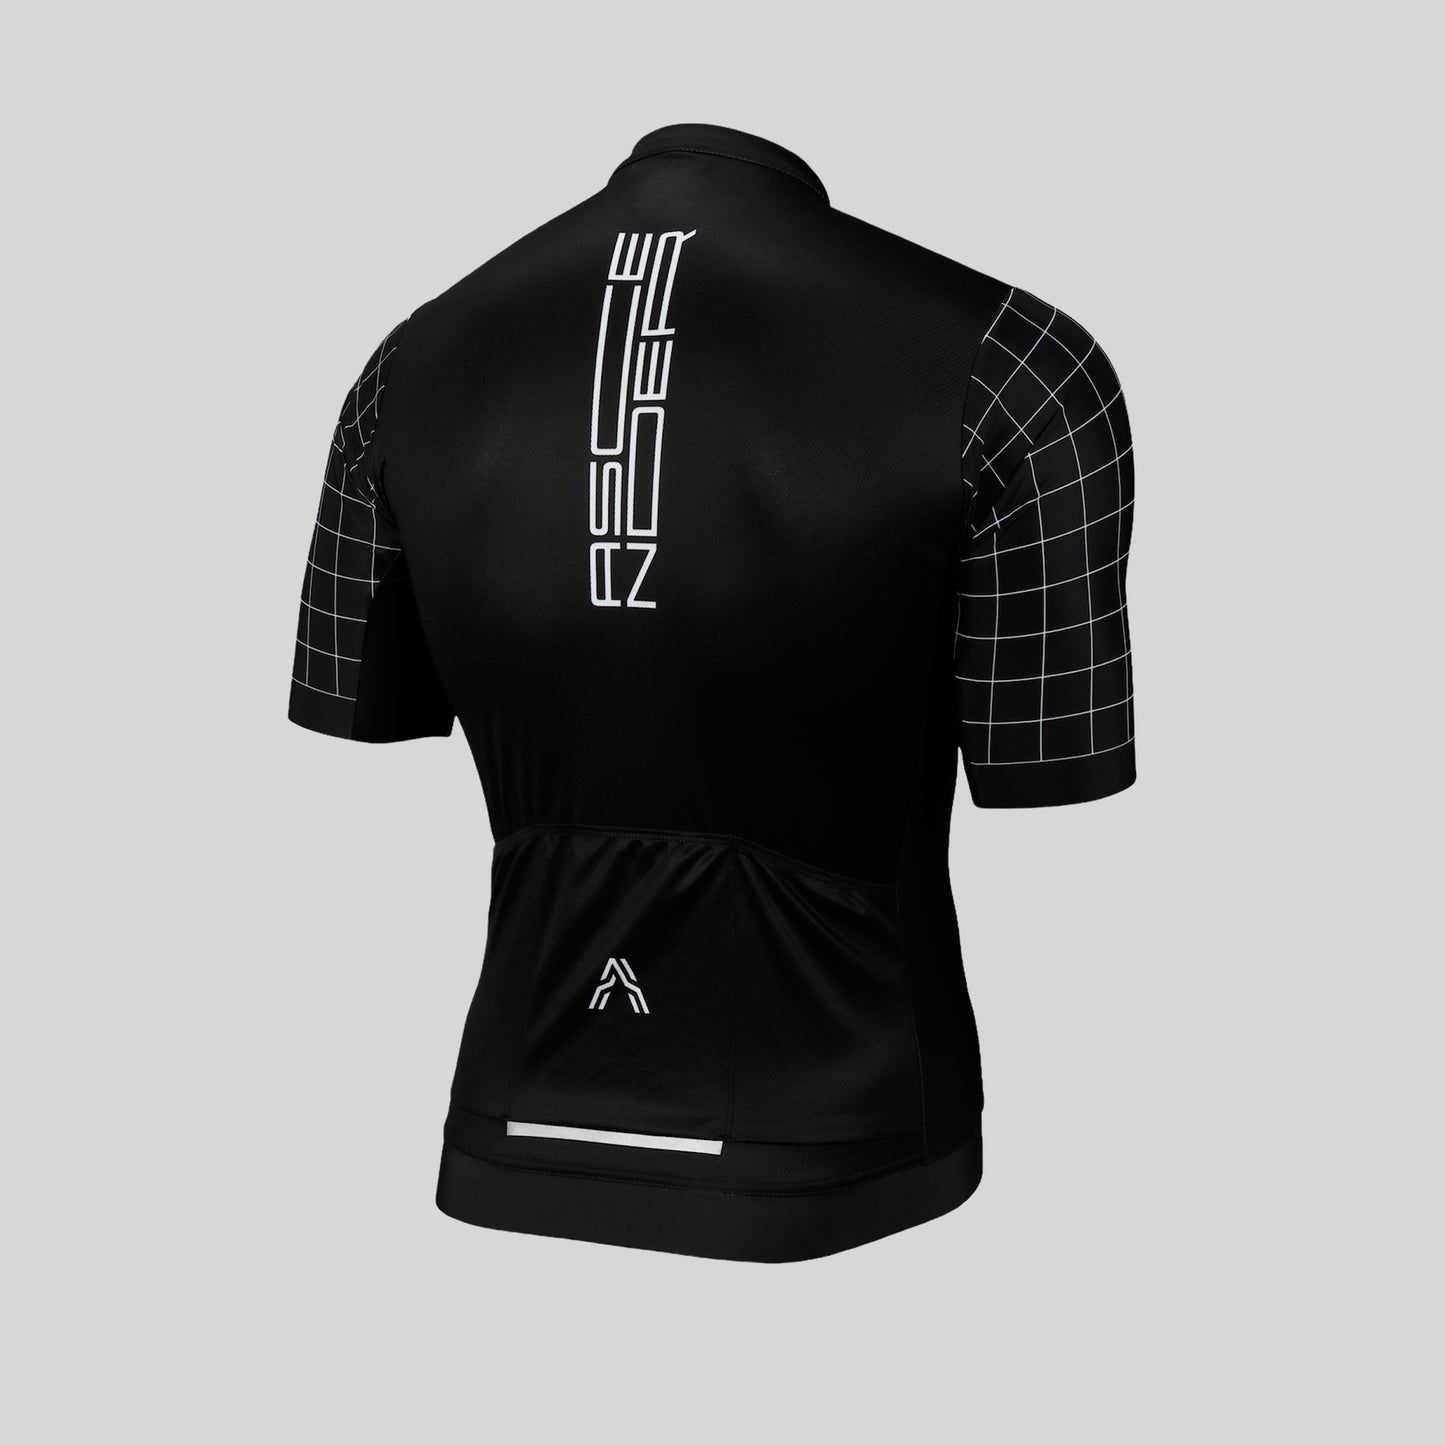 Supernova Sustainable Short Sleeves Cycling Jersey Black from Ascender Cycling Club Zürich Switzerland Back Design View